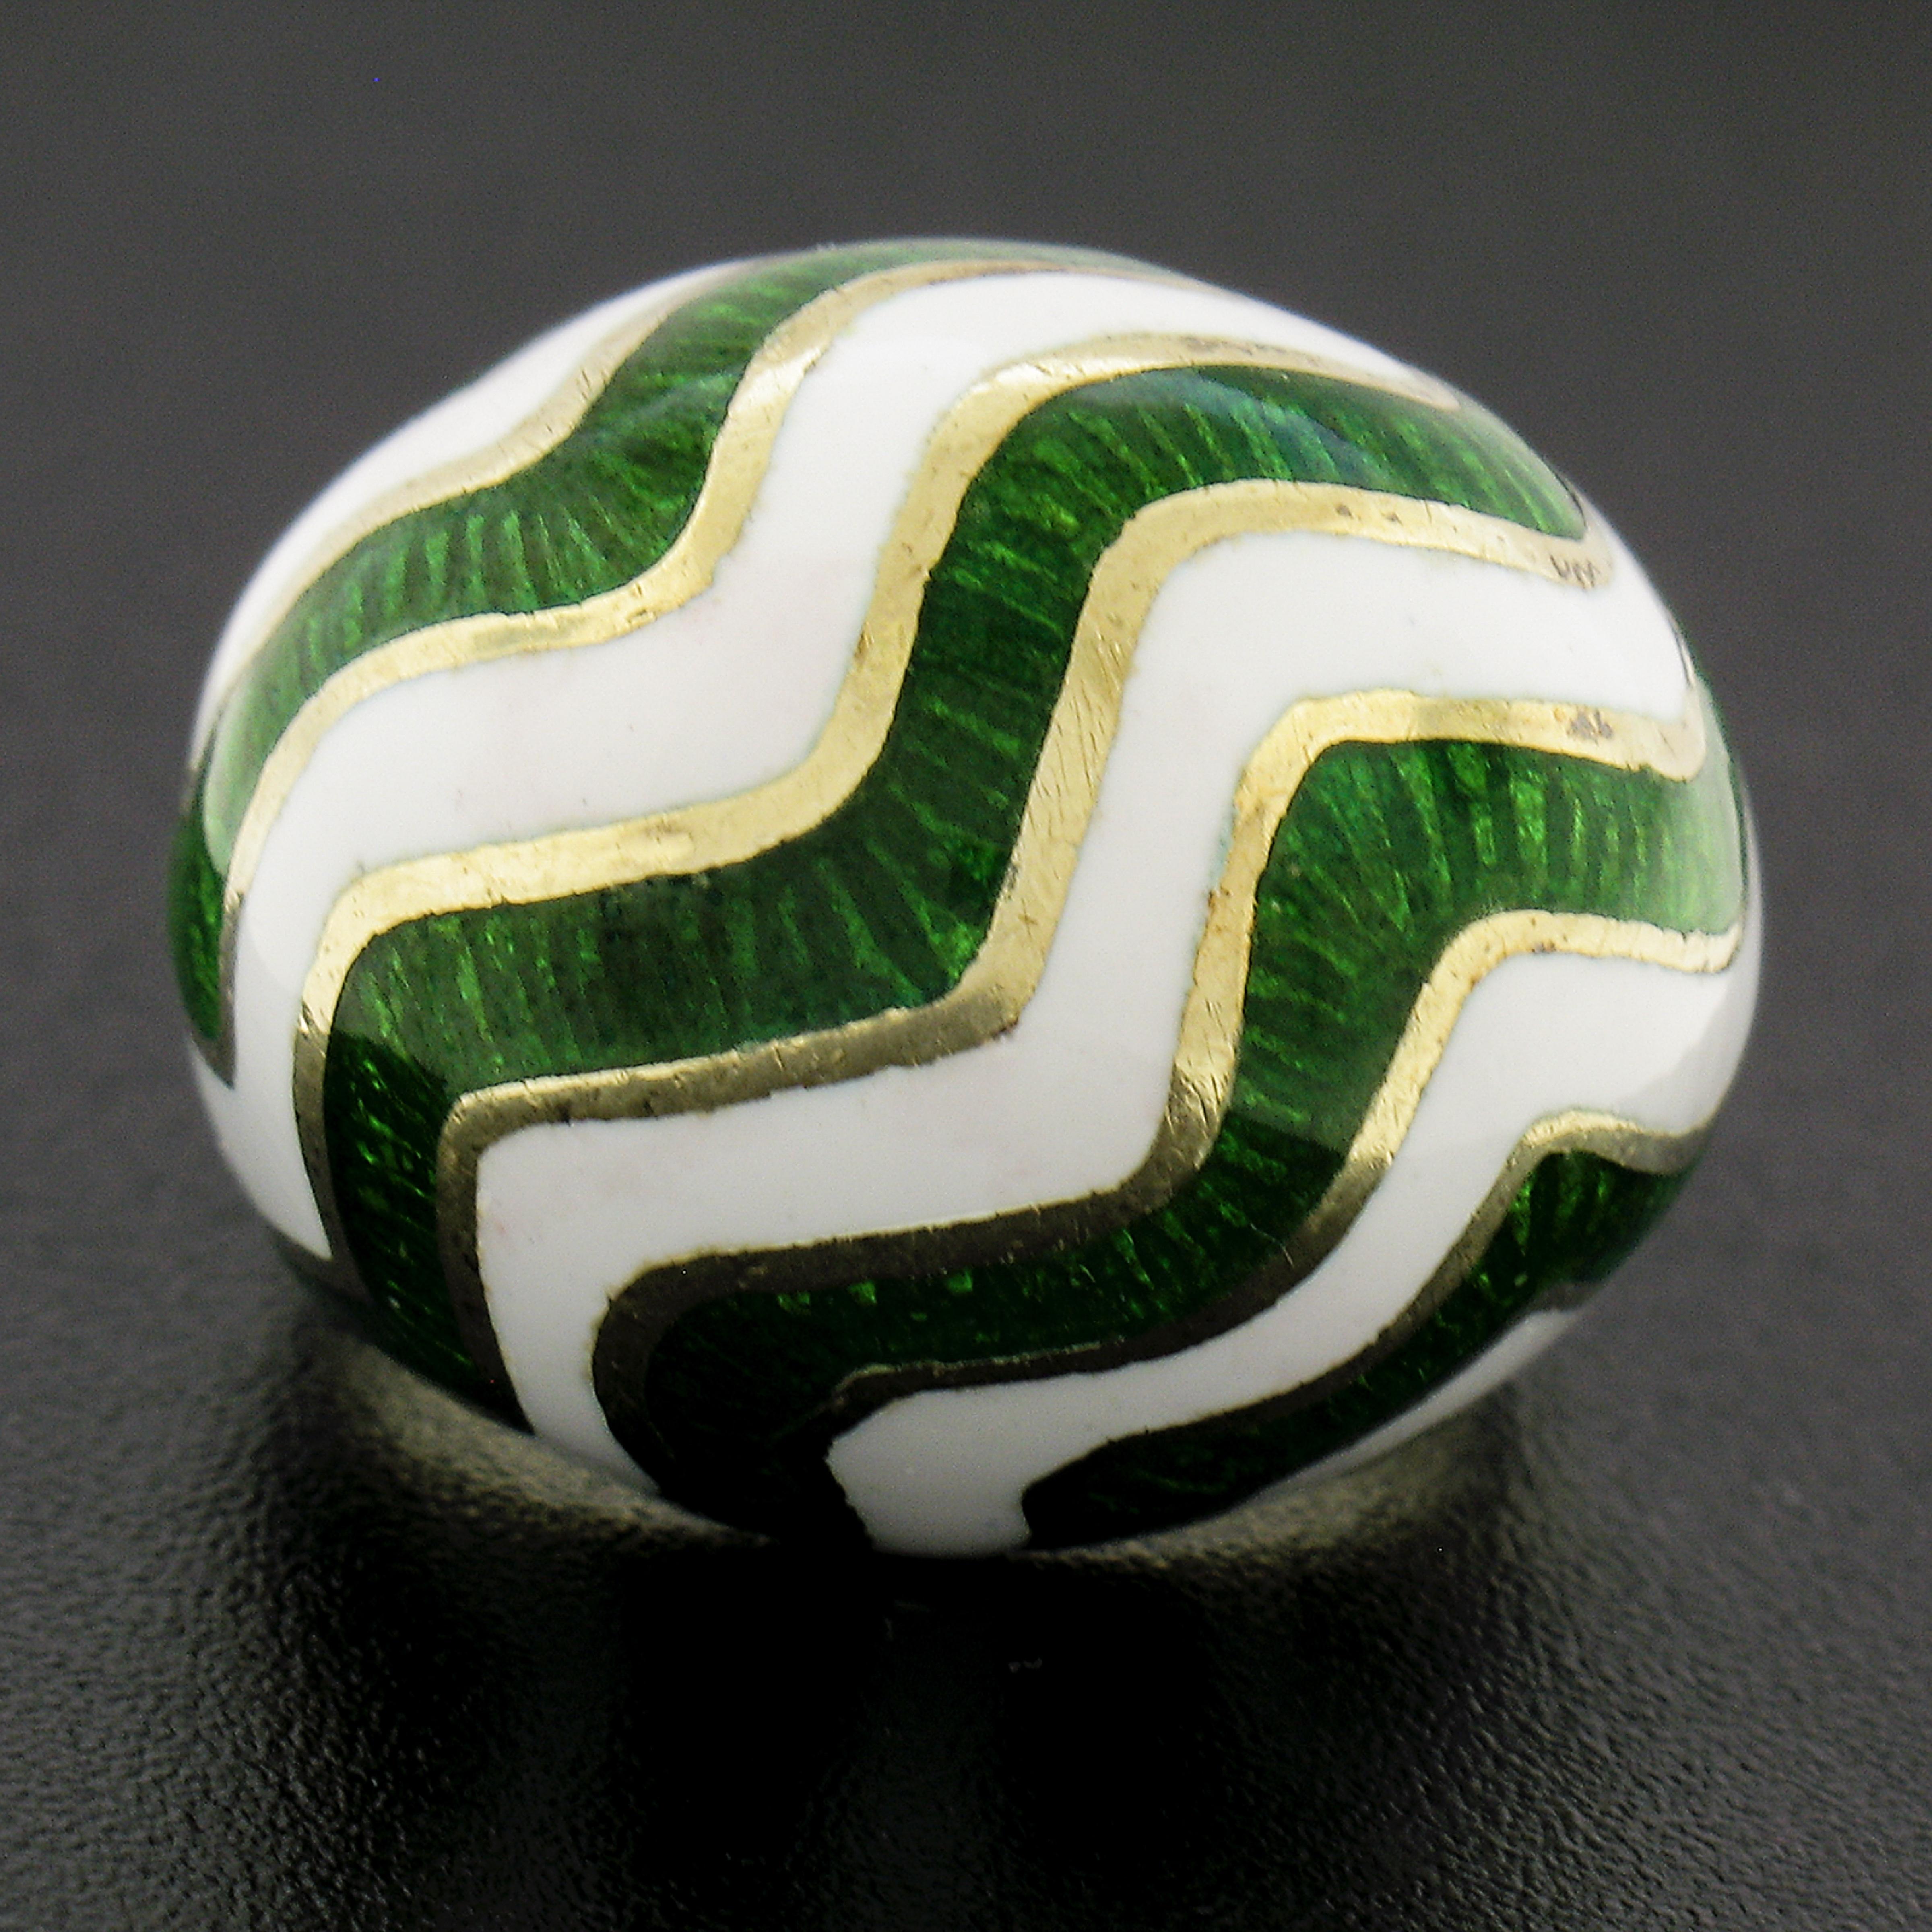 14K Yellow Gold White and Green Enamel Work Dome Bombe Cocktail Ring Size 6.5 In Excellent Condition For Sale In Montclair, NJ